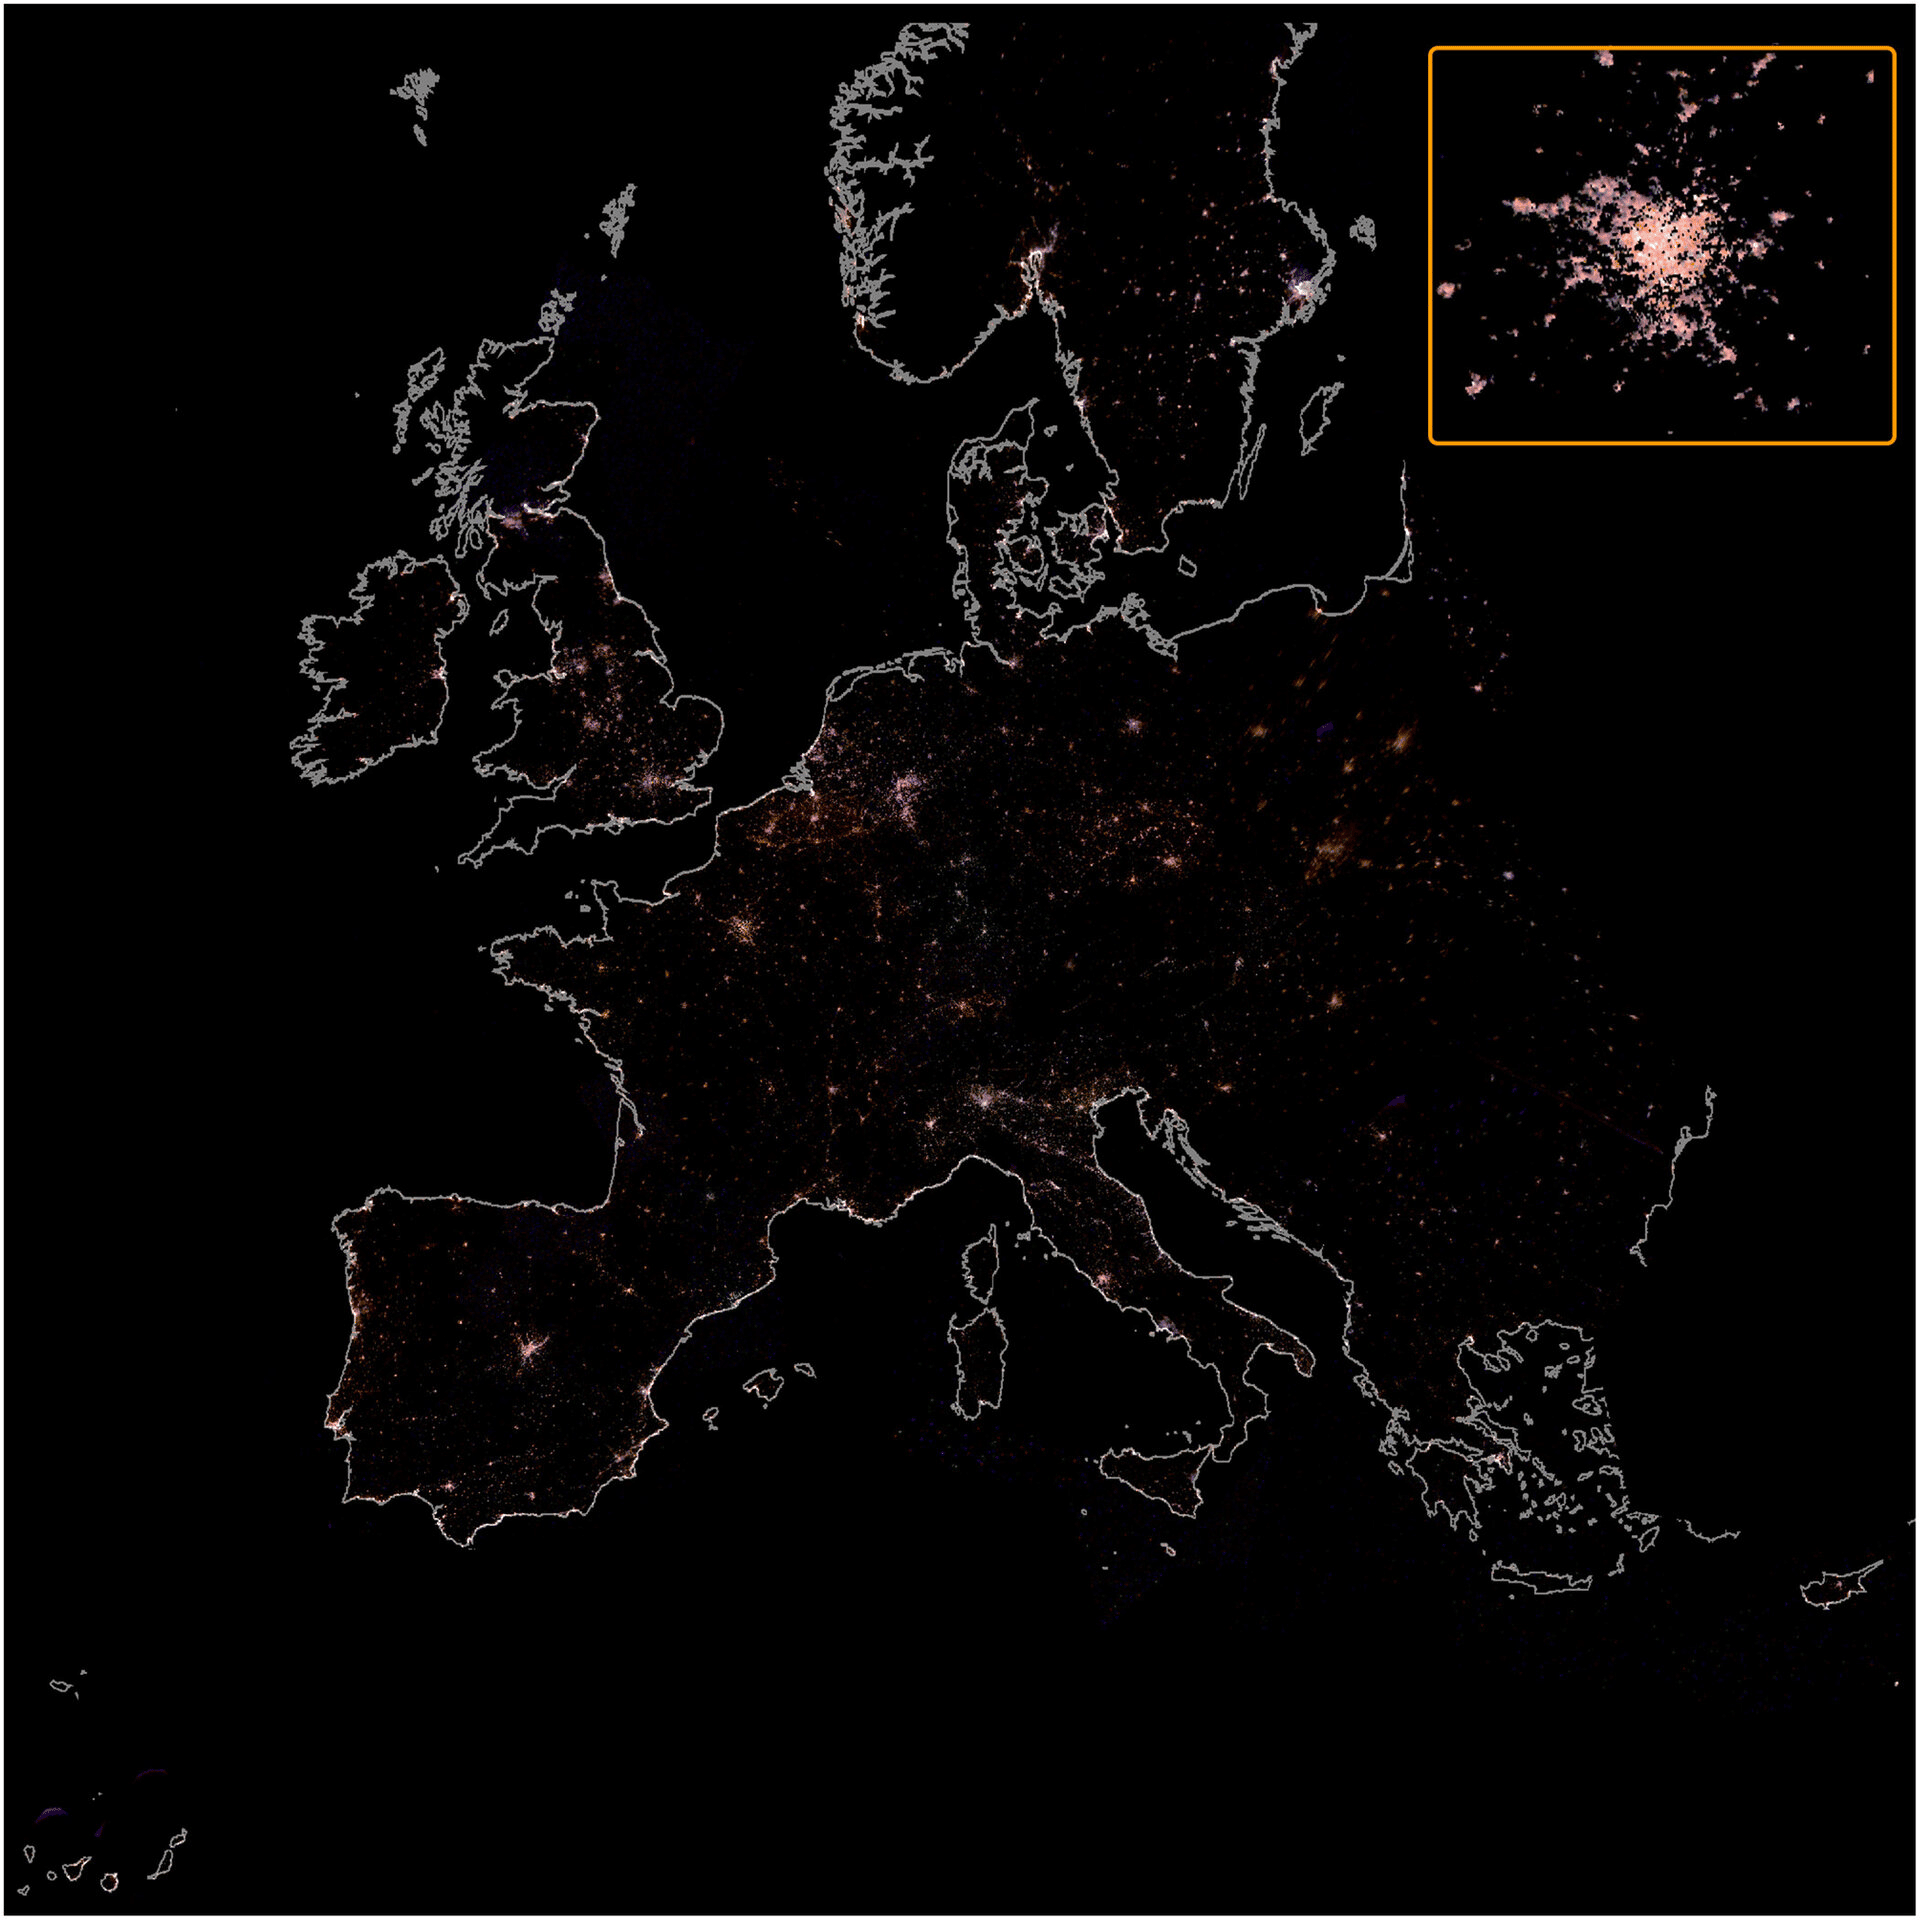 ISS astronauts mapped light pollution in Europe 1